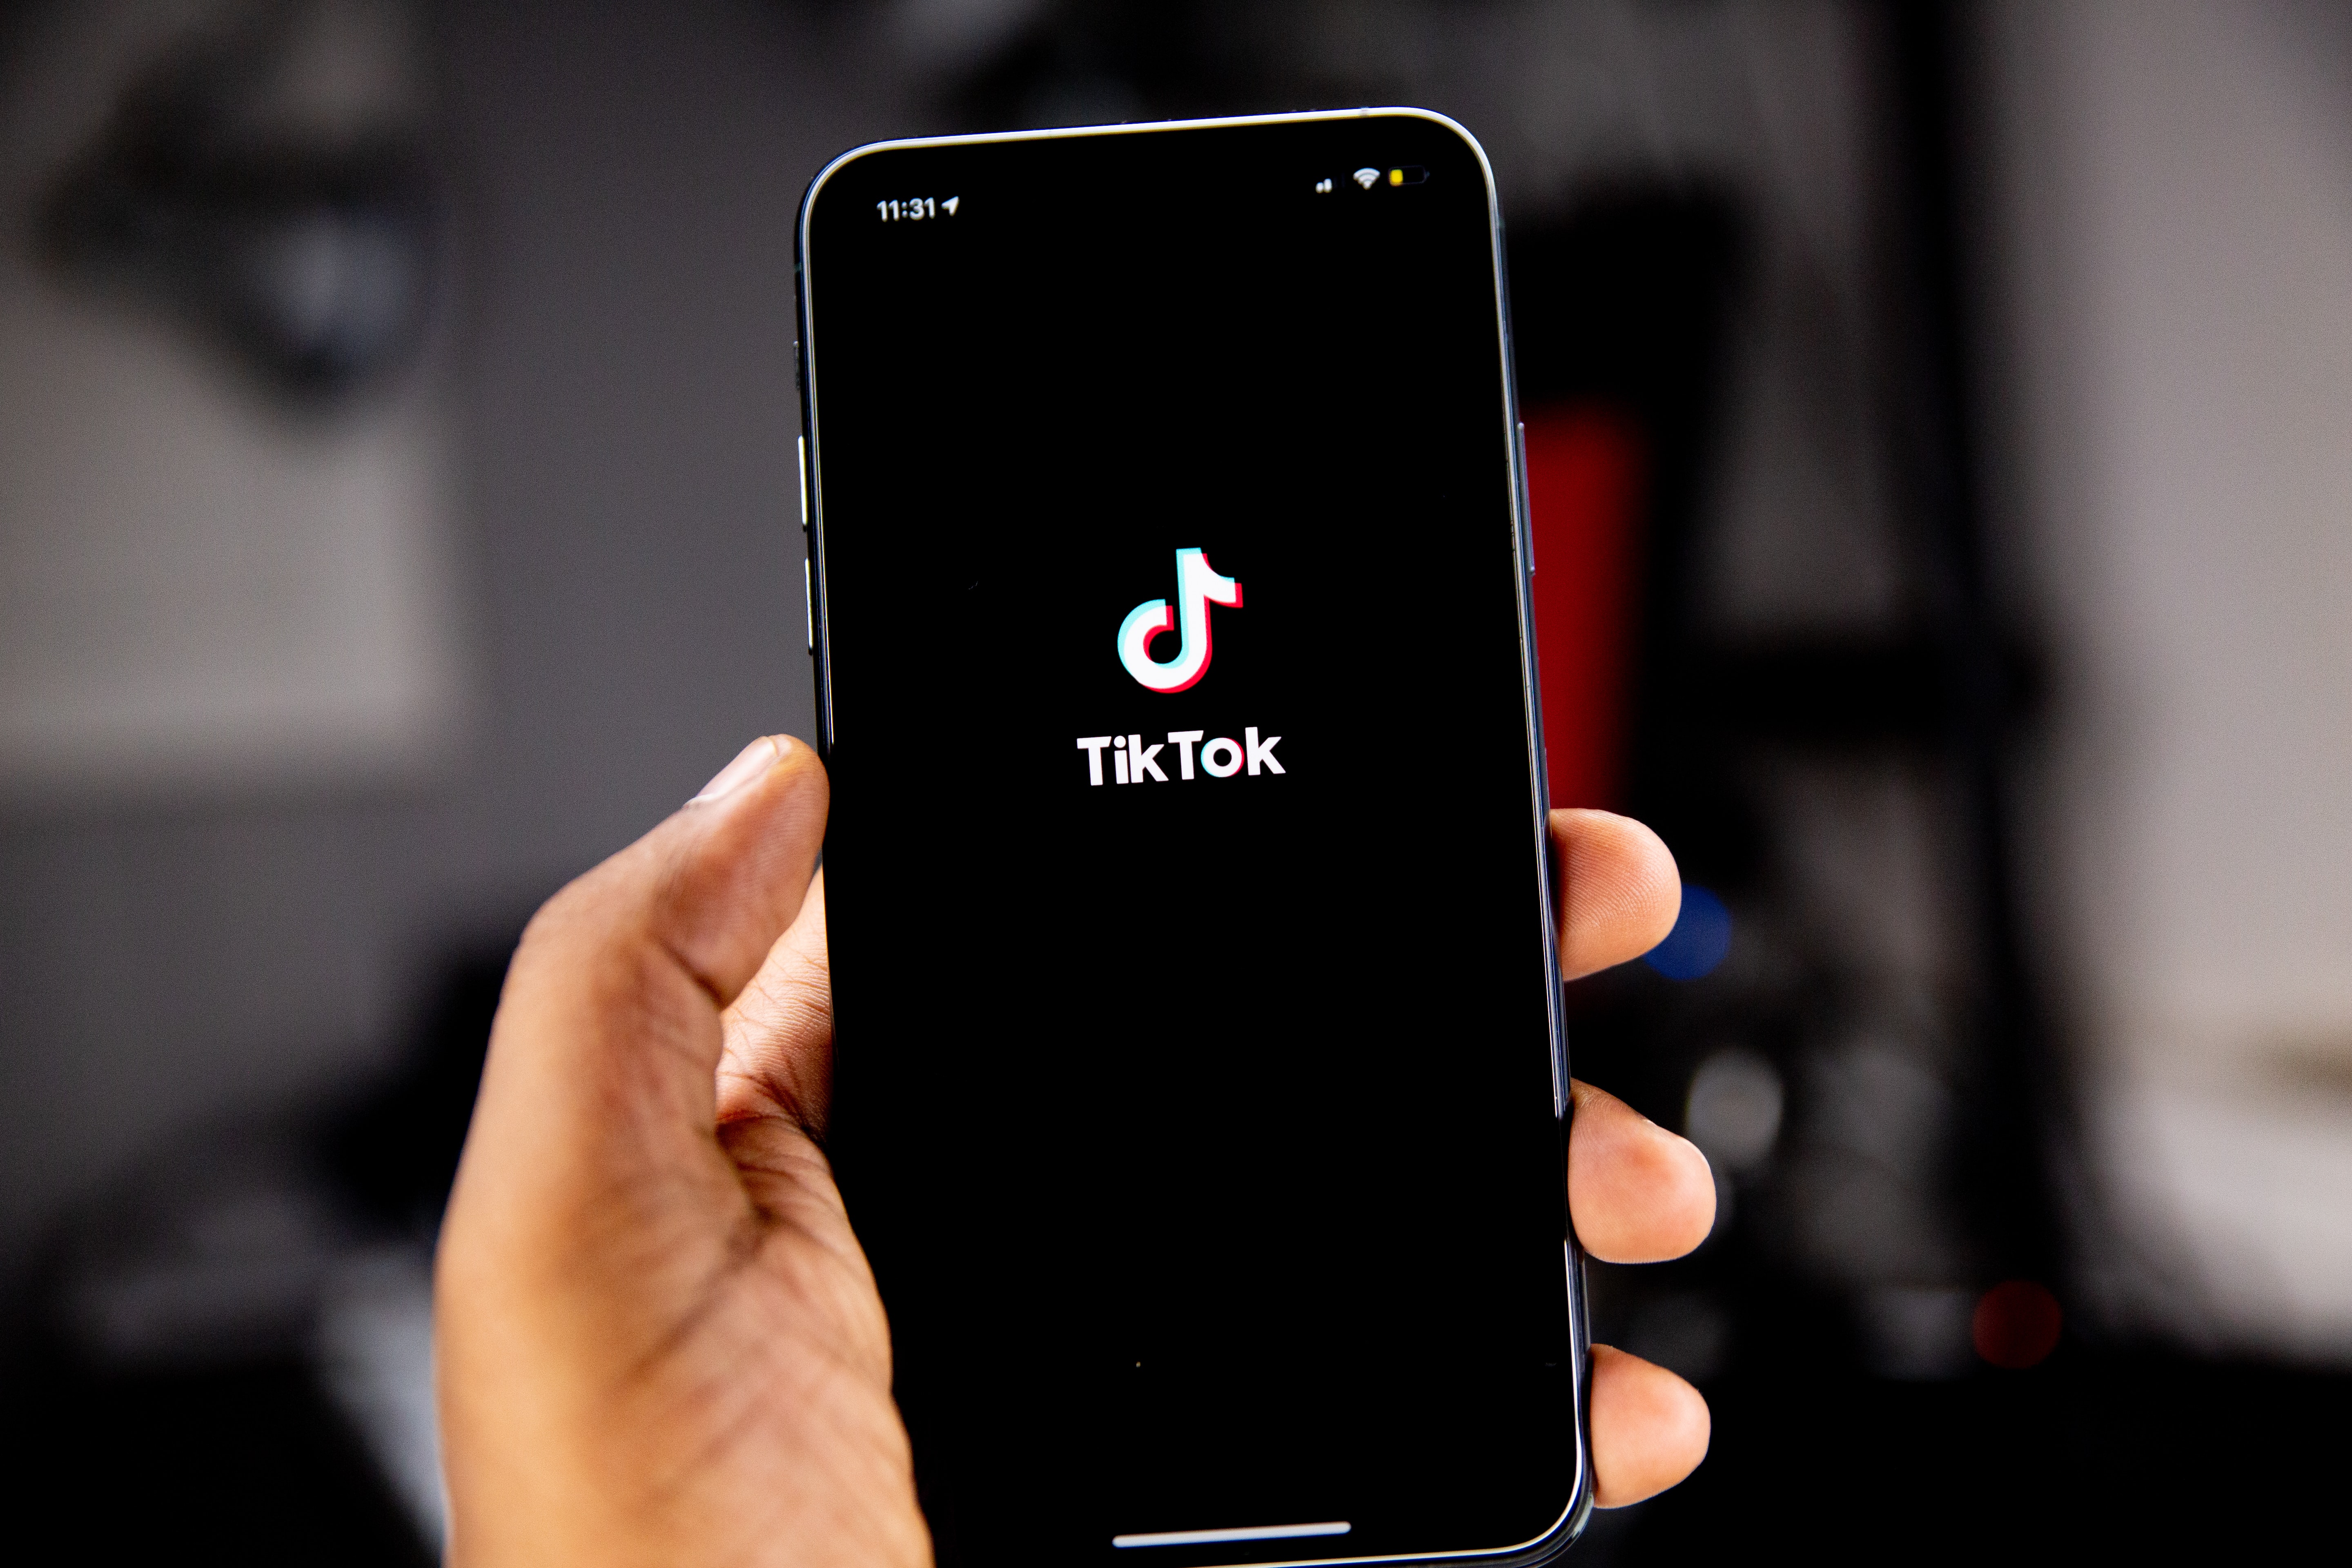 More universities ban TikTok from their systems